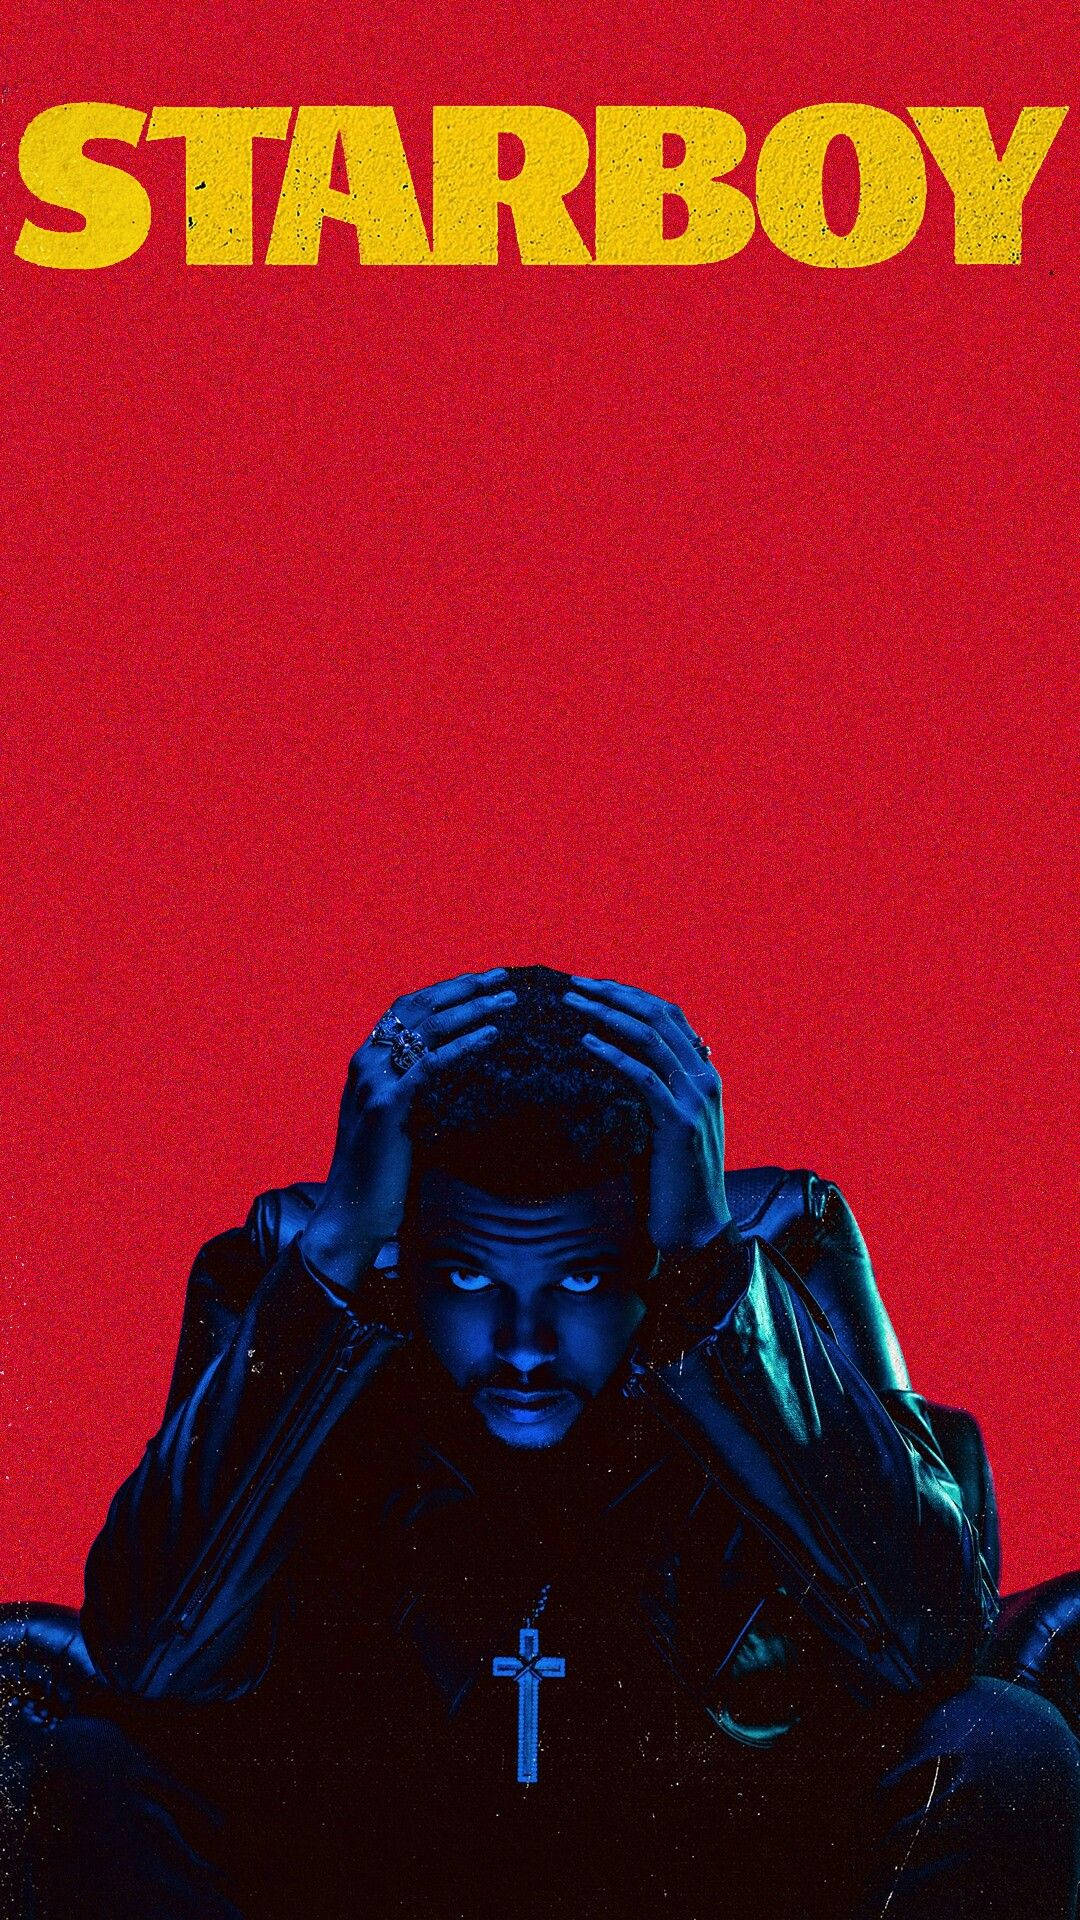 The Weeknd Starboy Cover Art Background